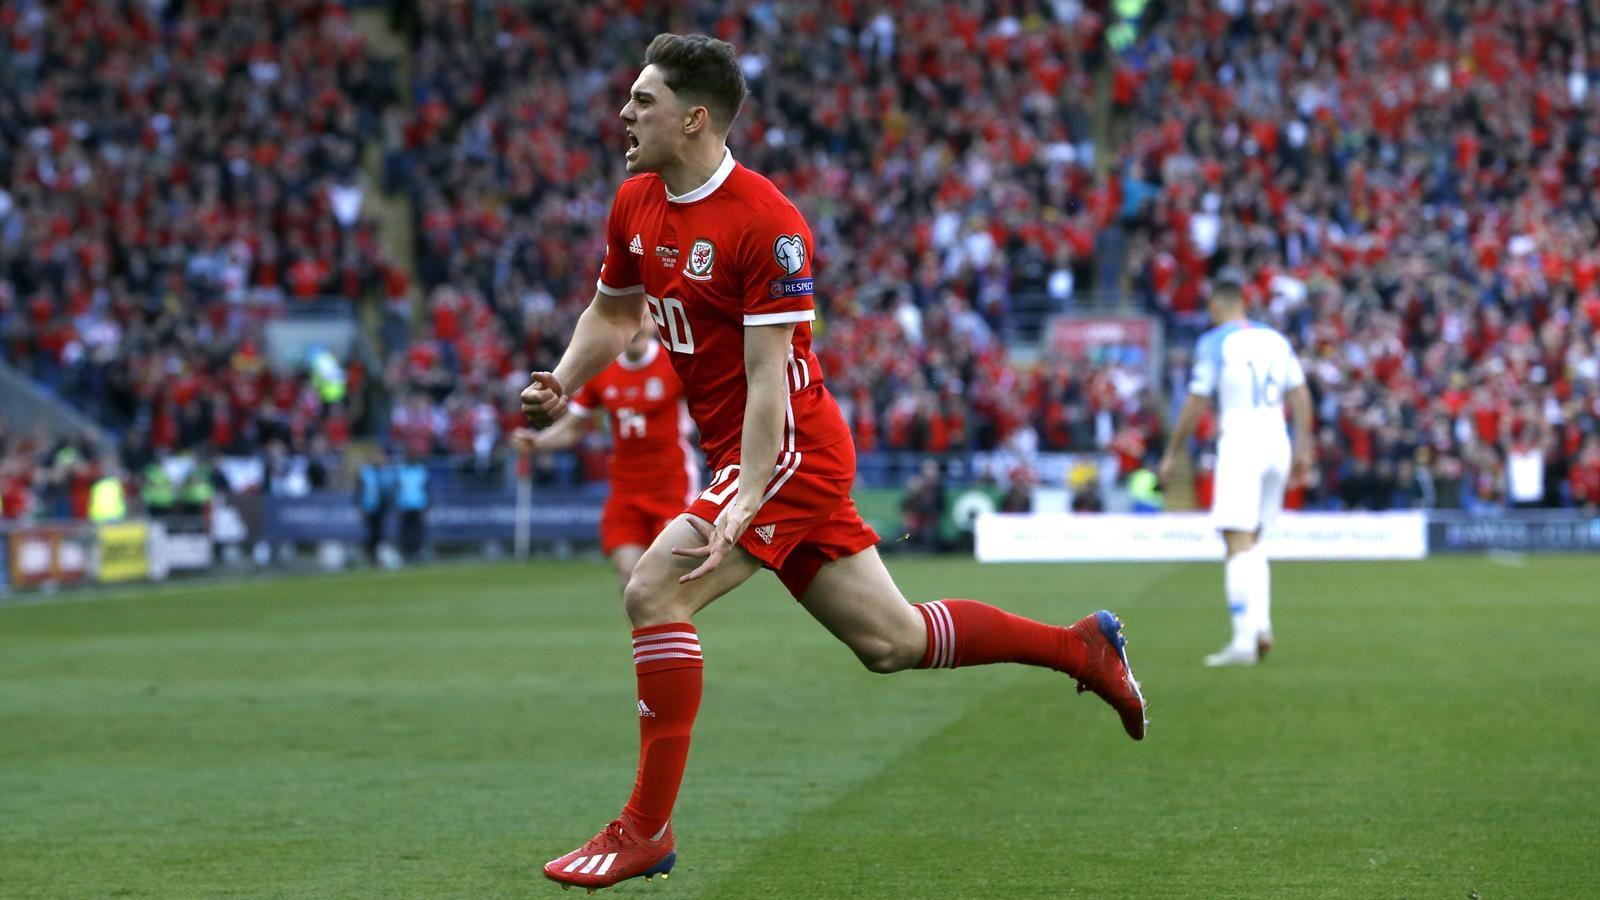 Daniel James goal gives Wales perfect start to Euro 2020